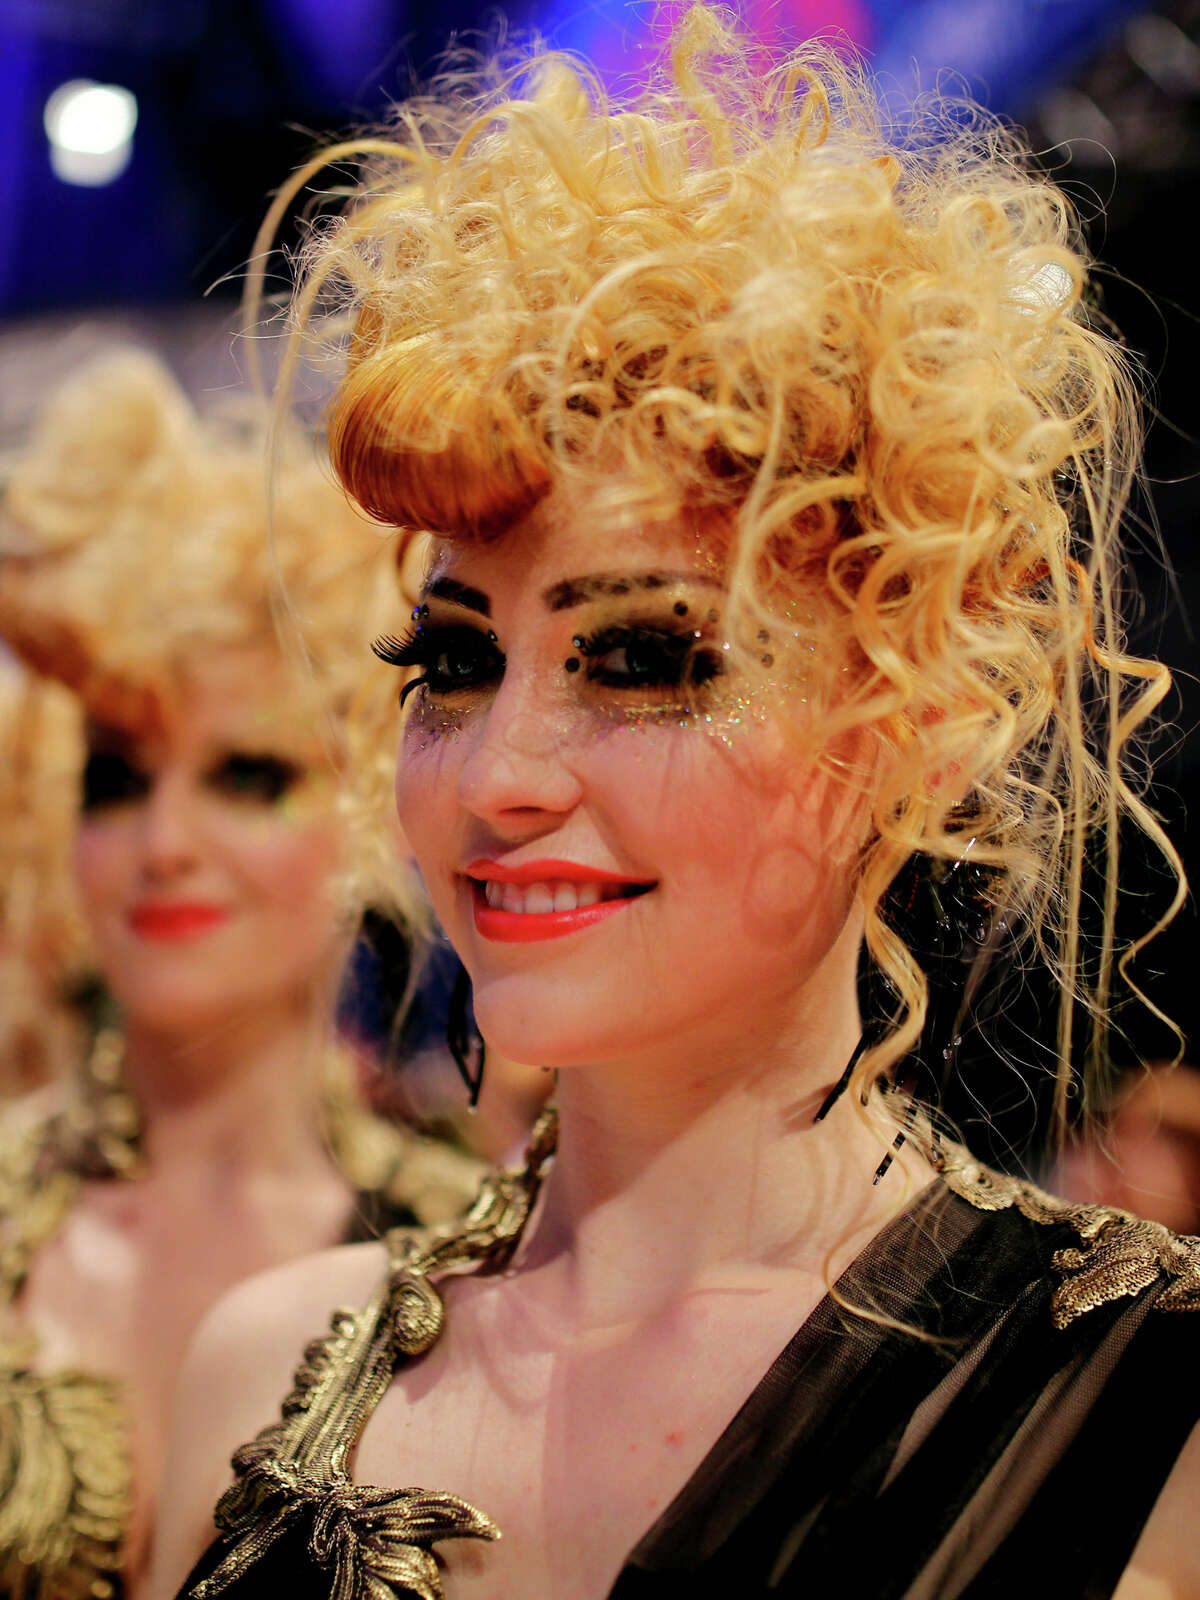 Models walk on the podium during the OMC Hairworld World Cup contest on May 5, 2014 in Frankfurt am Main, Germany.